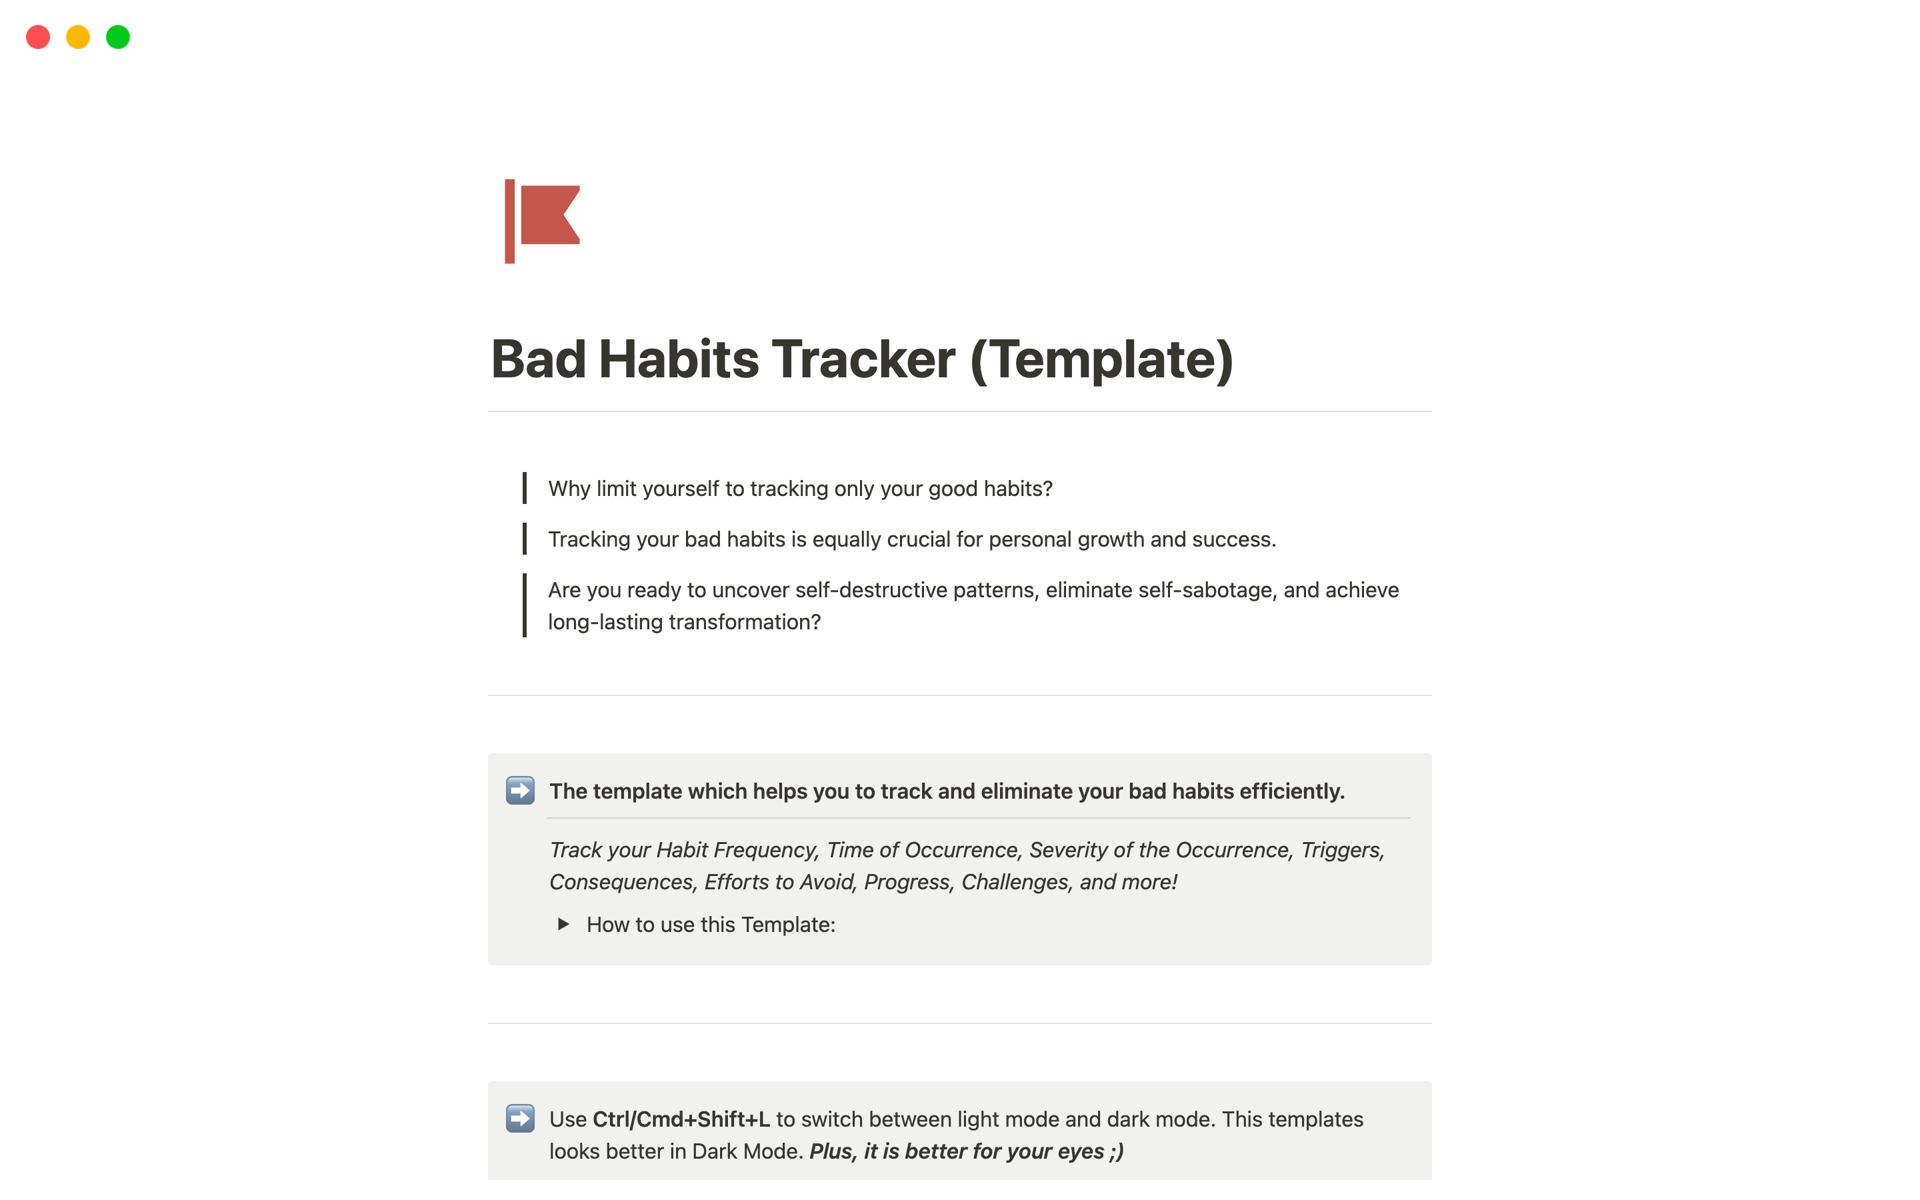 Helps you track and eliminate your bad habits efficiently.